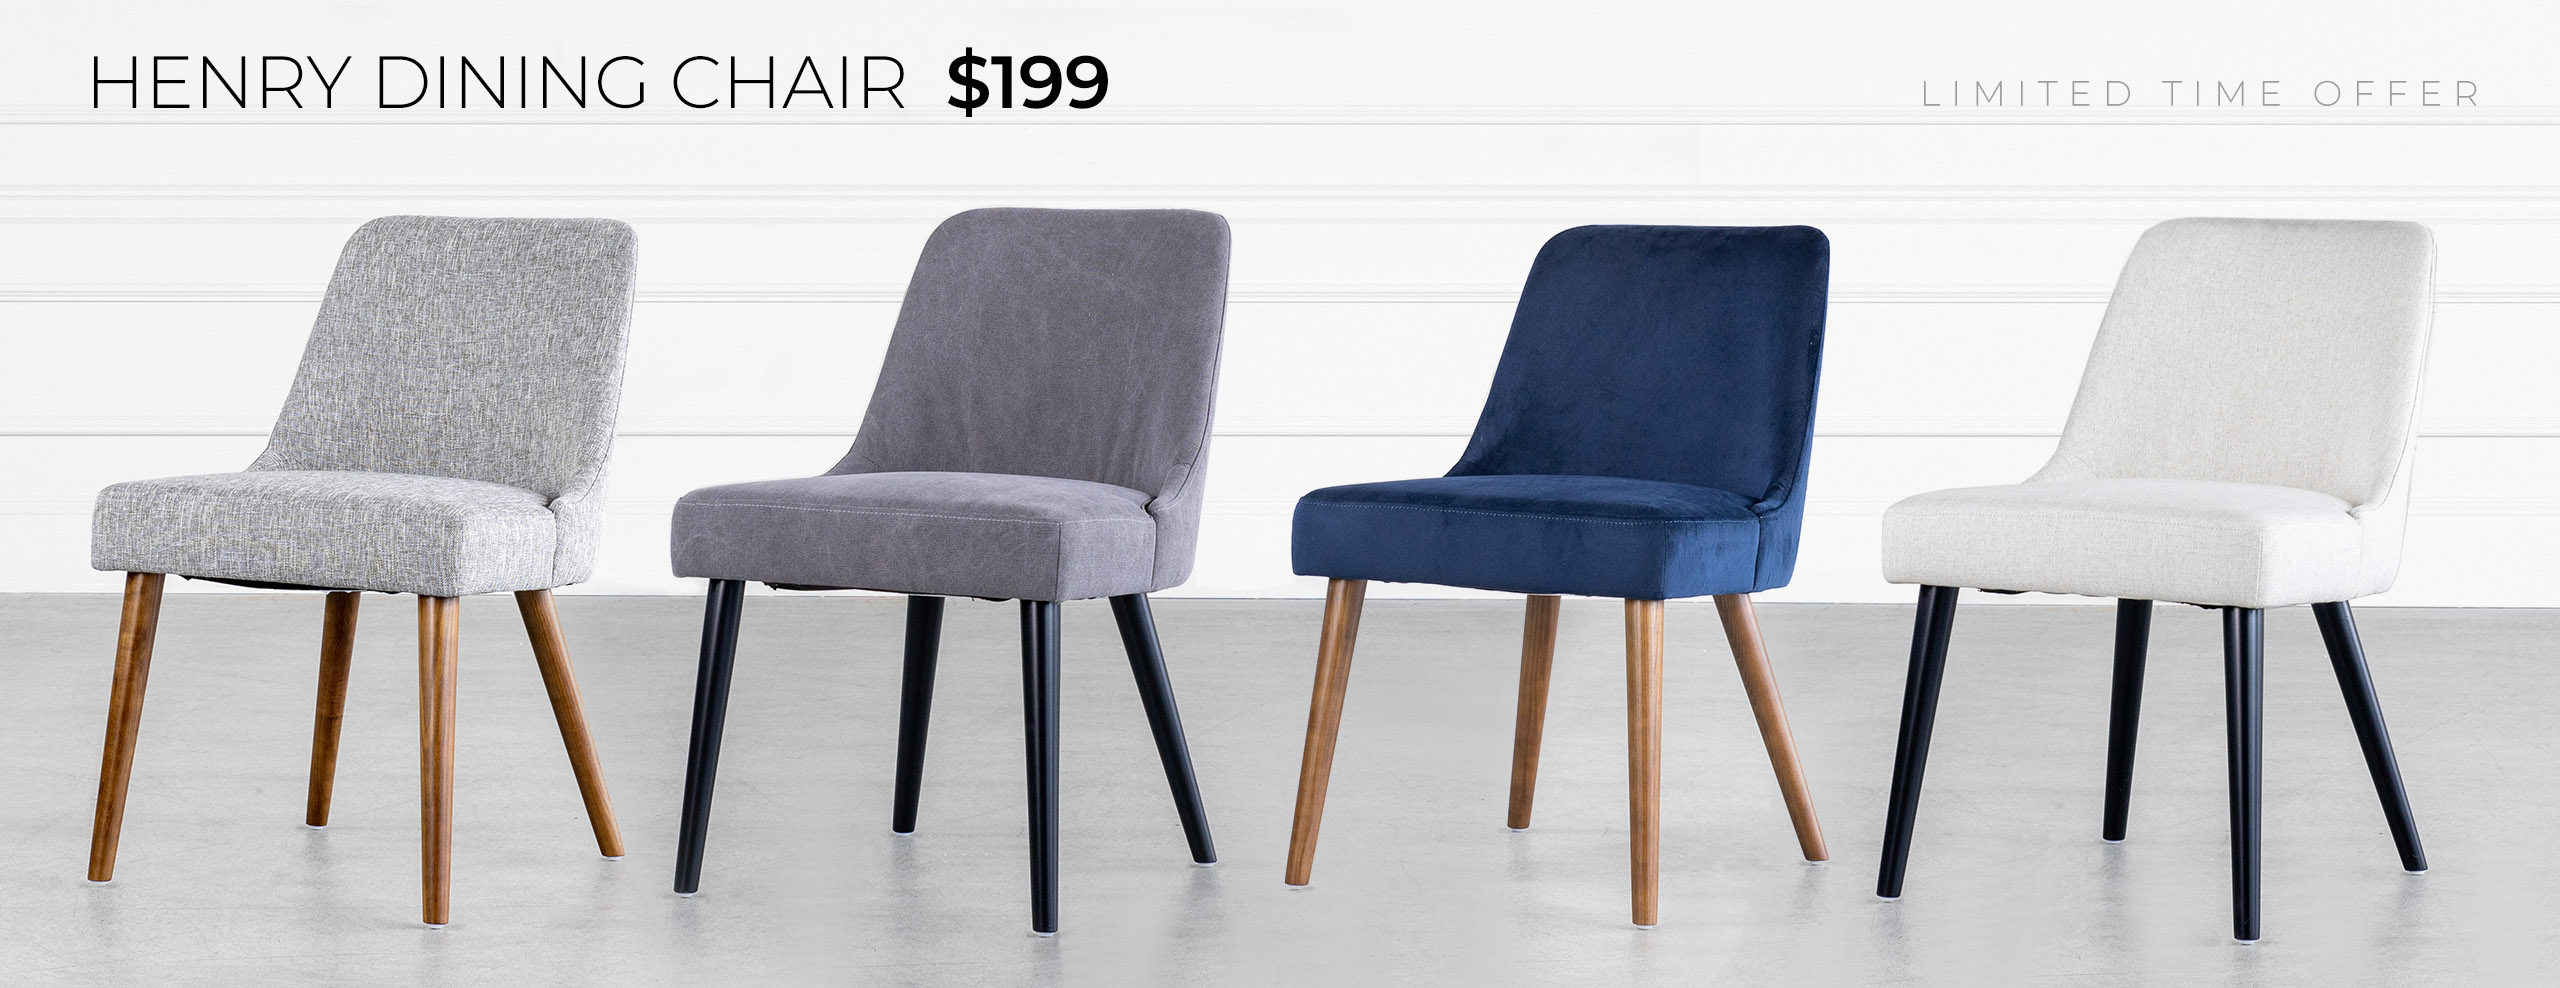 Henry Dining Chair - $199 - Limited Time Offer